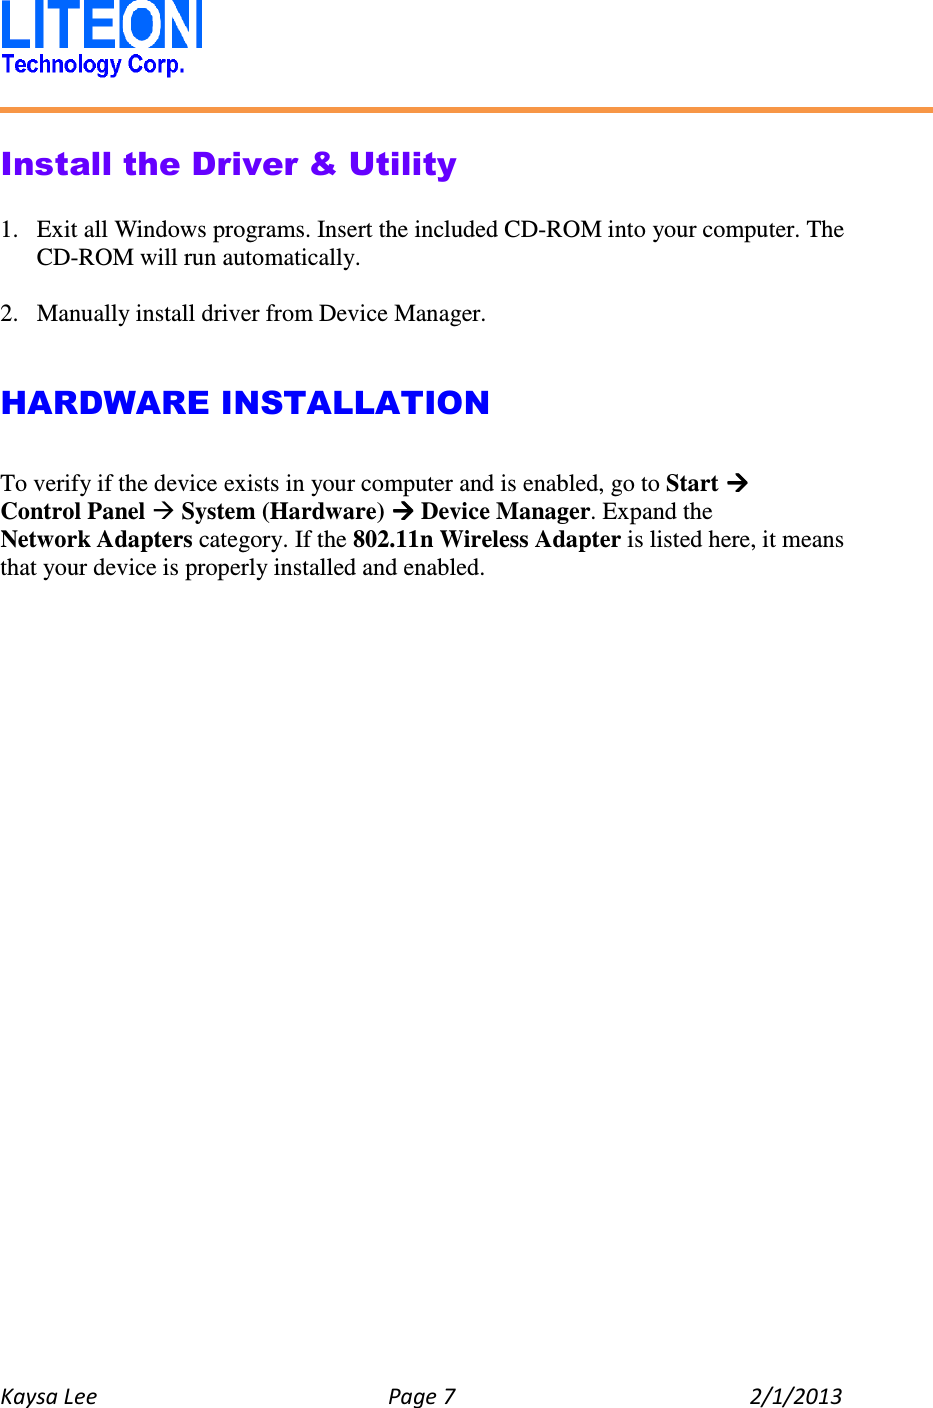   Kaysa Lee  Page 7  2/1/2013    Install the Driver &amp; Utility  1. Exit all Windows programs. Insert the included CD-ROM into your computer. The CD-ROM will run automatically.  2. Manually install driver from Device Manager.   HARDWARE INSTALLATION  To verify if the device exists in your computer and is enabled, go to Start  Control Panel  System (Hardware)  Device Manager. Expand the Network Adapters category. If the 802.11n Wireless Adapter is listed here, it means that your device is properly installed and enabled.    